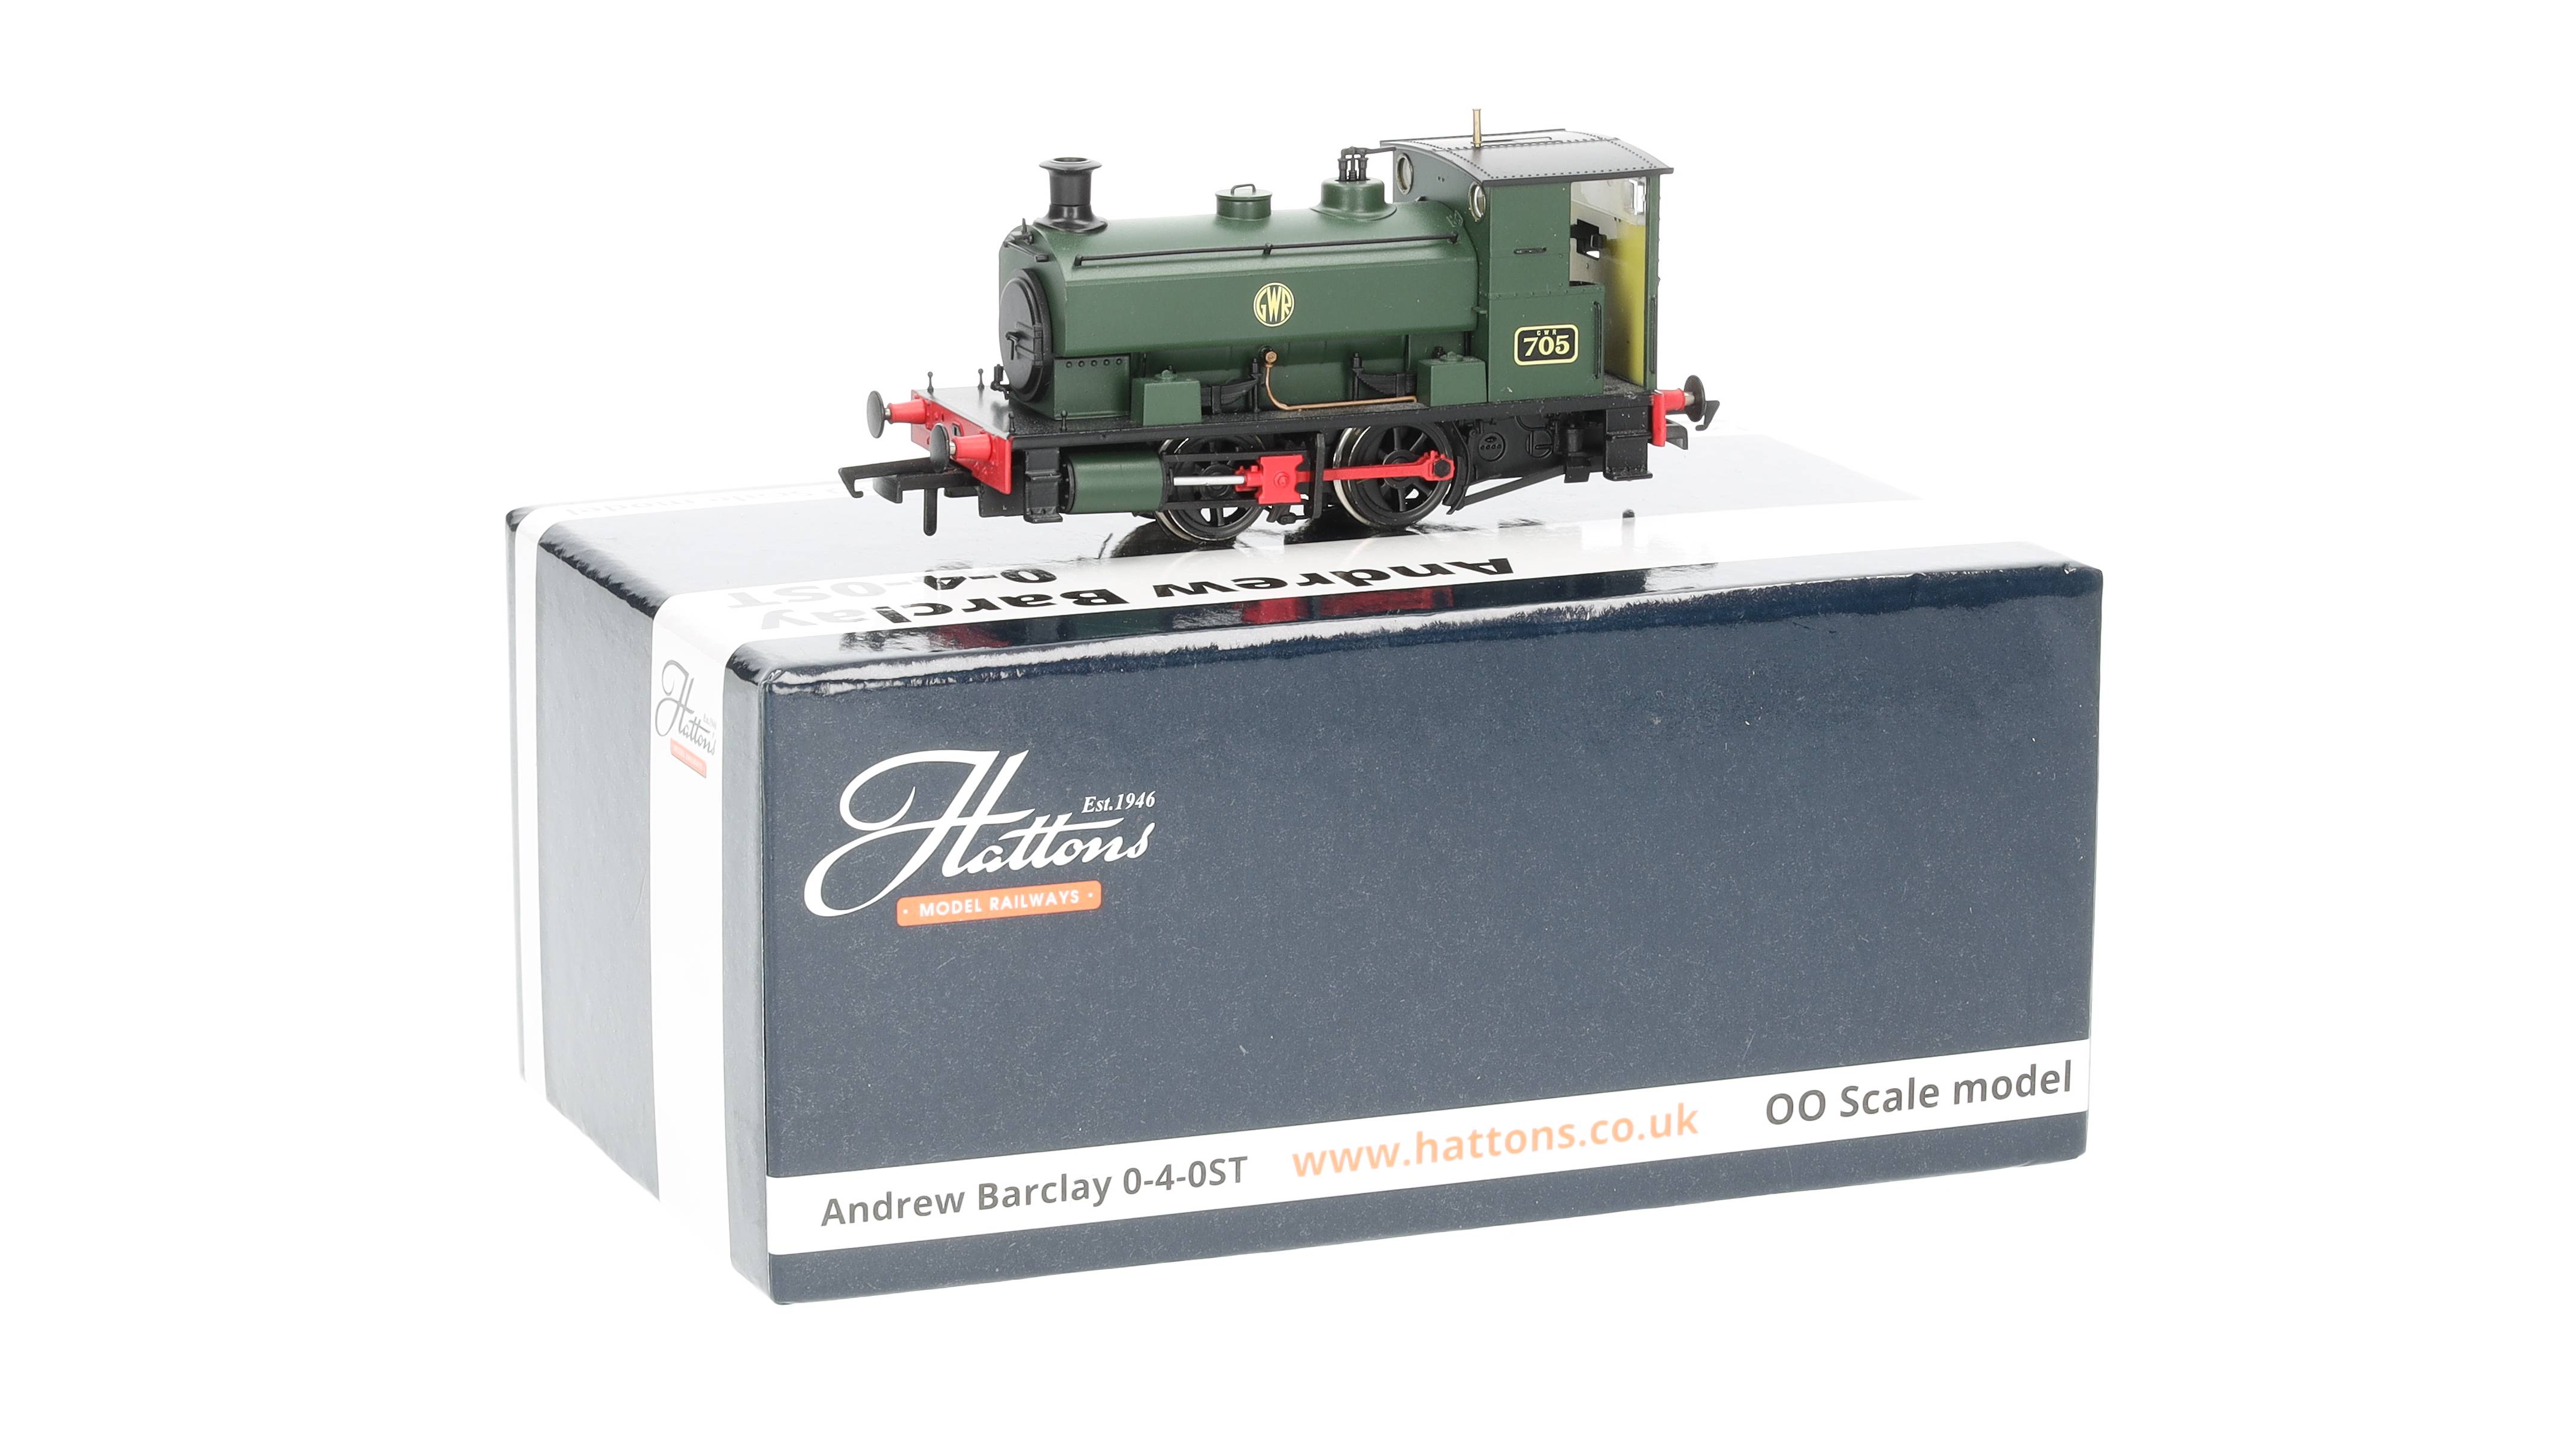 H4-AB14-002 Hattons Originals OO Gauge Andrew Barclay 14 2047 '705'(Pre-Owned) - 第 1/1 張圖片